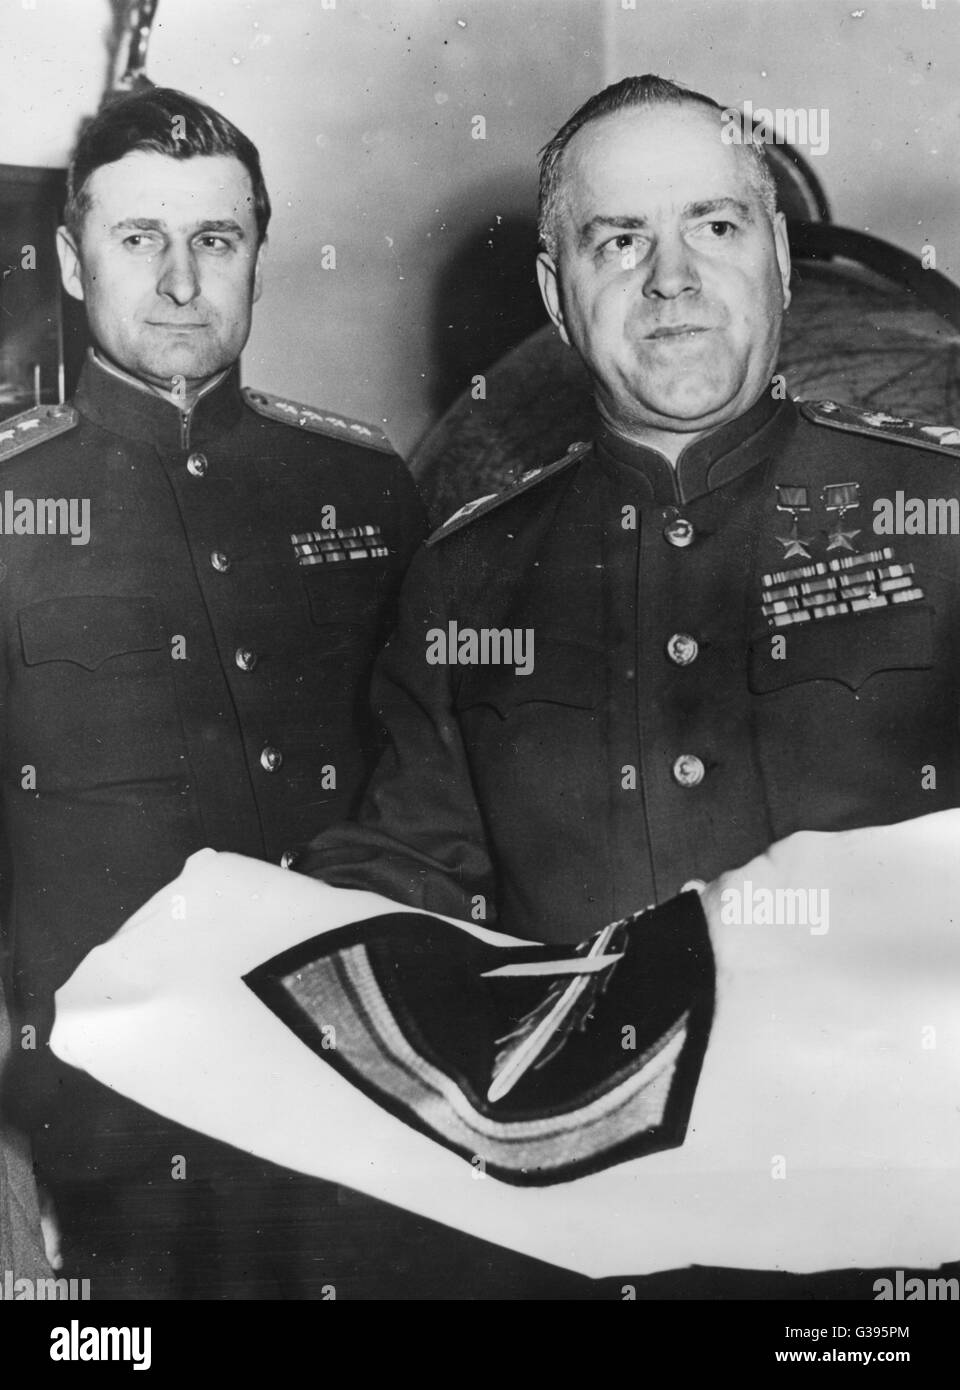 Field Marshal Georgy K. Zhukov (right), Deputy Commander in Chief for all Soviet Forces and General Vasily Sokolovsky (left) (1897-1968), Chief of Staff to Marshal Zhukov, after they received the SHEF emblem flag, gift of General Eisenhower, Supreme Allied Commander. Stock Photo